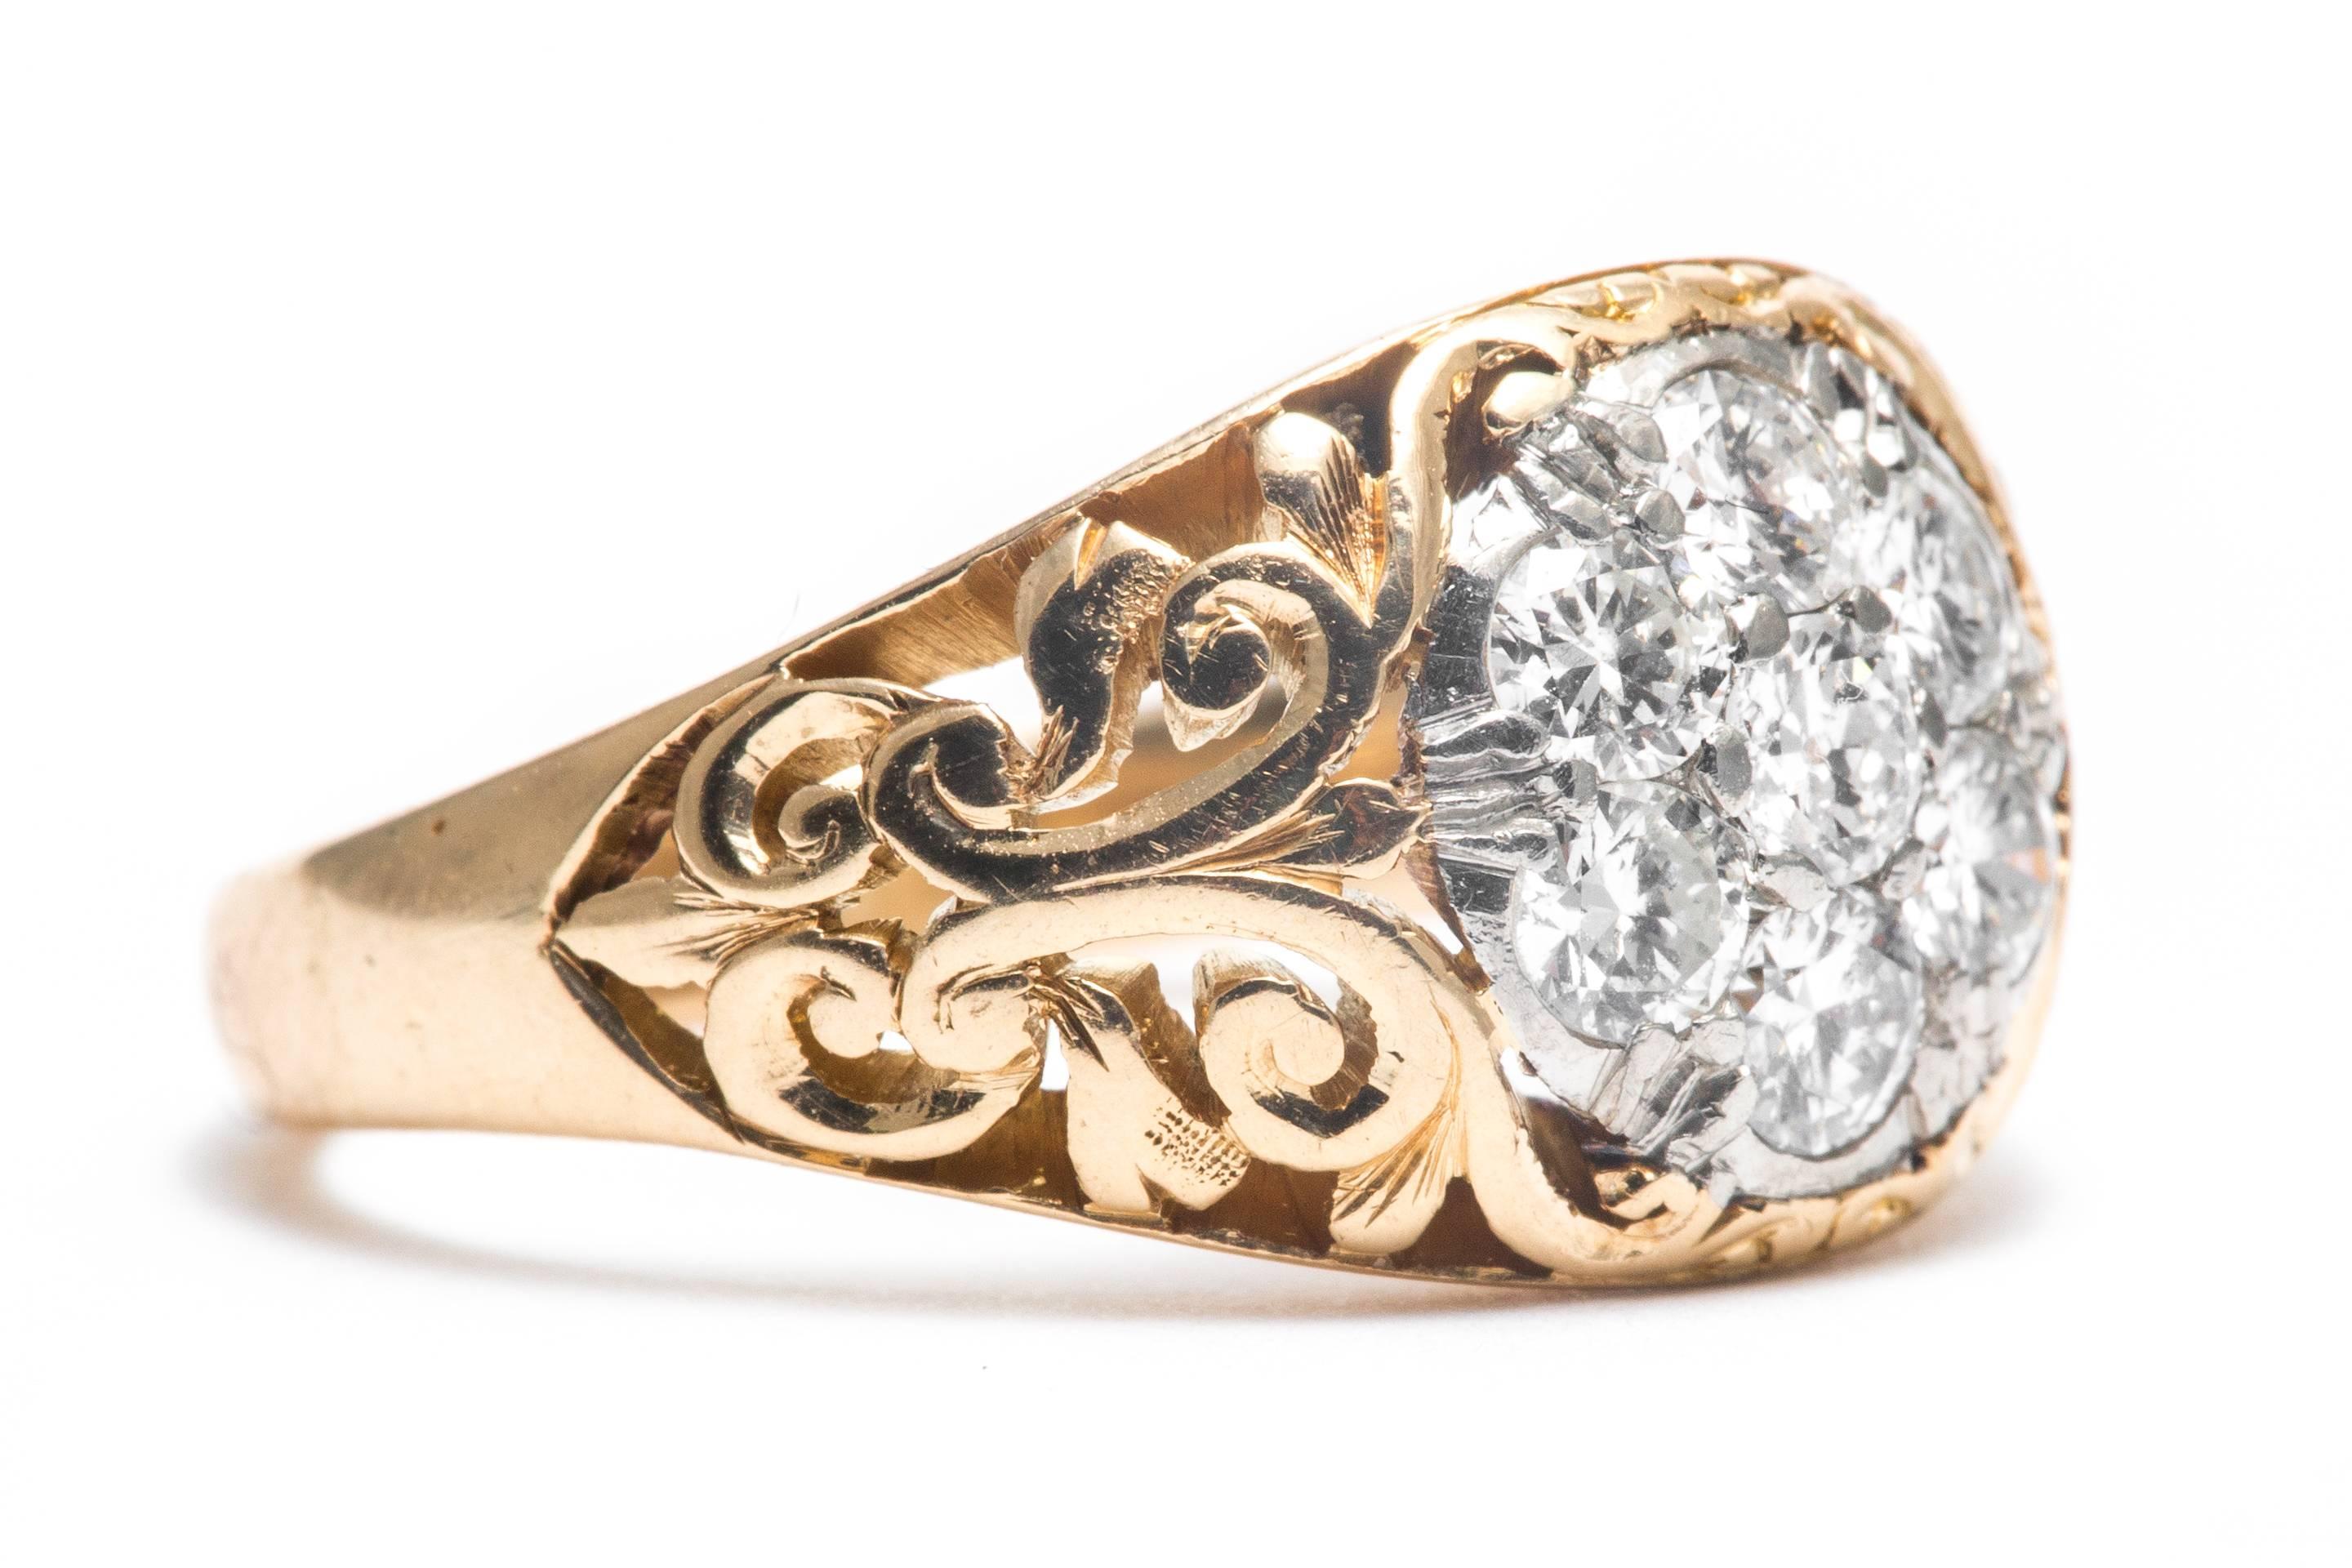 Beacon Hill Jewelers Presents:

An original art nouveau period scroll form diamond cluster ring in platinum and 14 karat yellow gold.  Set with a total of seven antique European cut diamonds weighing a combined 0.70 carats this ring features a